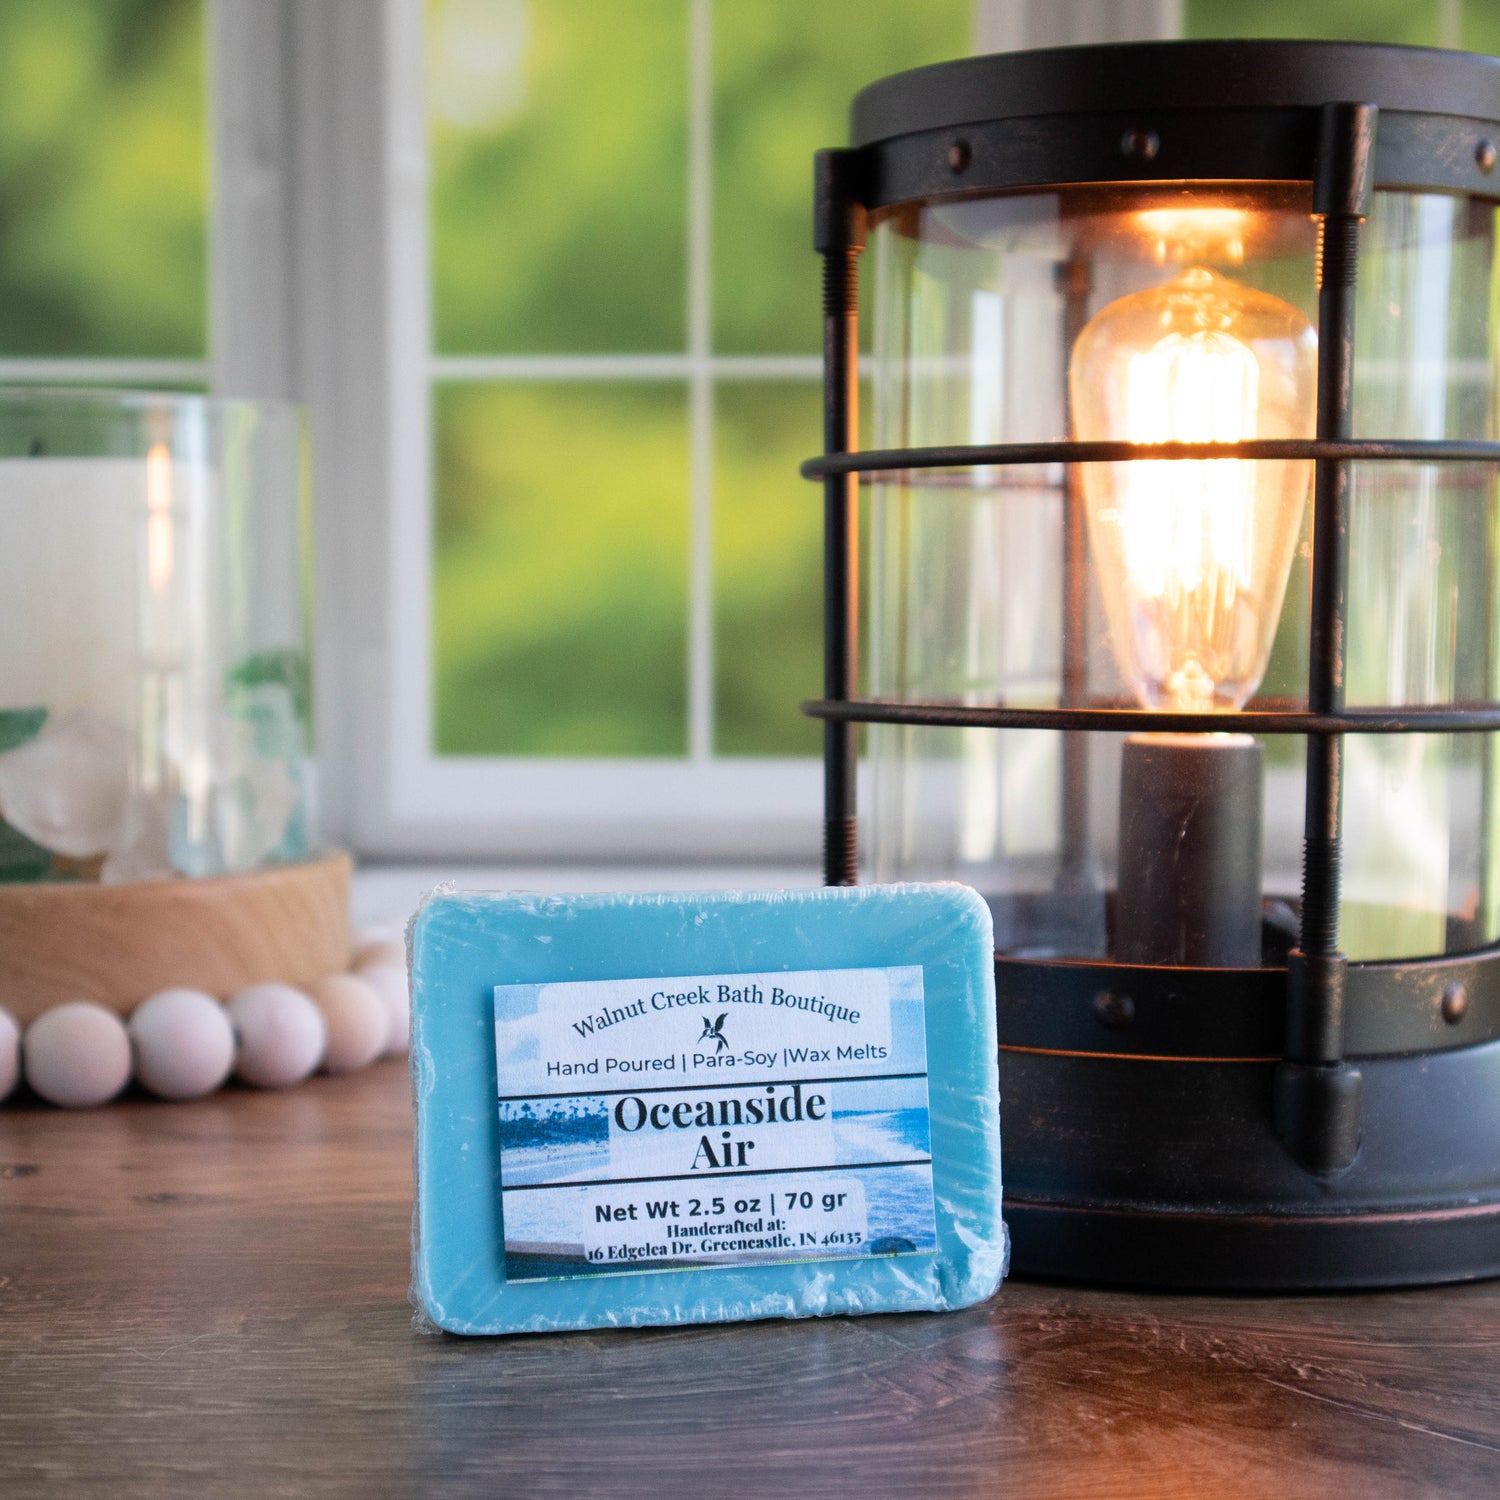 Oceanside Air is pictured. It is a pretty blue color. Laying up against a lit wax warmers. There is a candle with a wood bead in the background and in the very back view is a window with some green leaves showing.